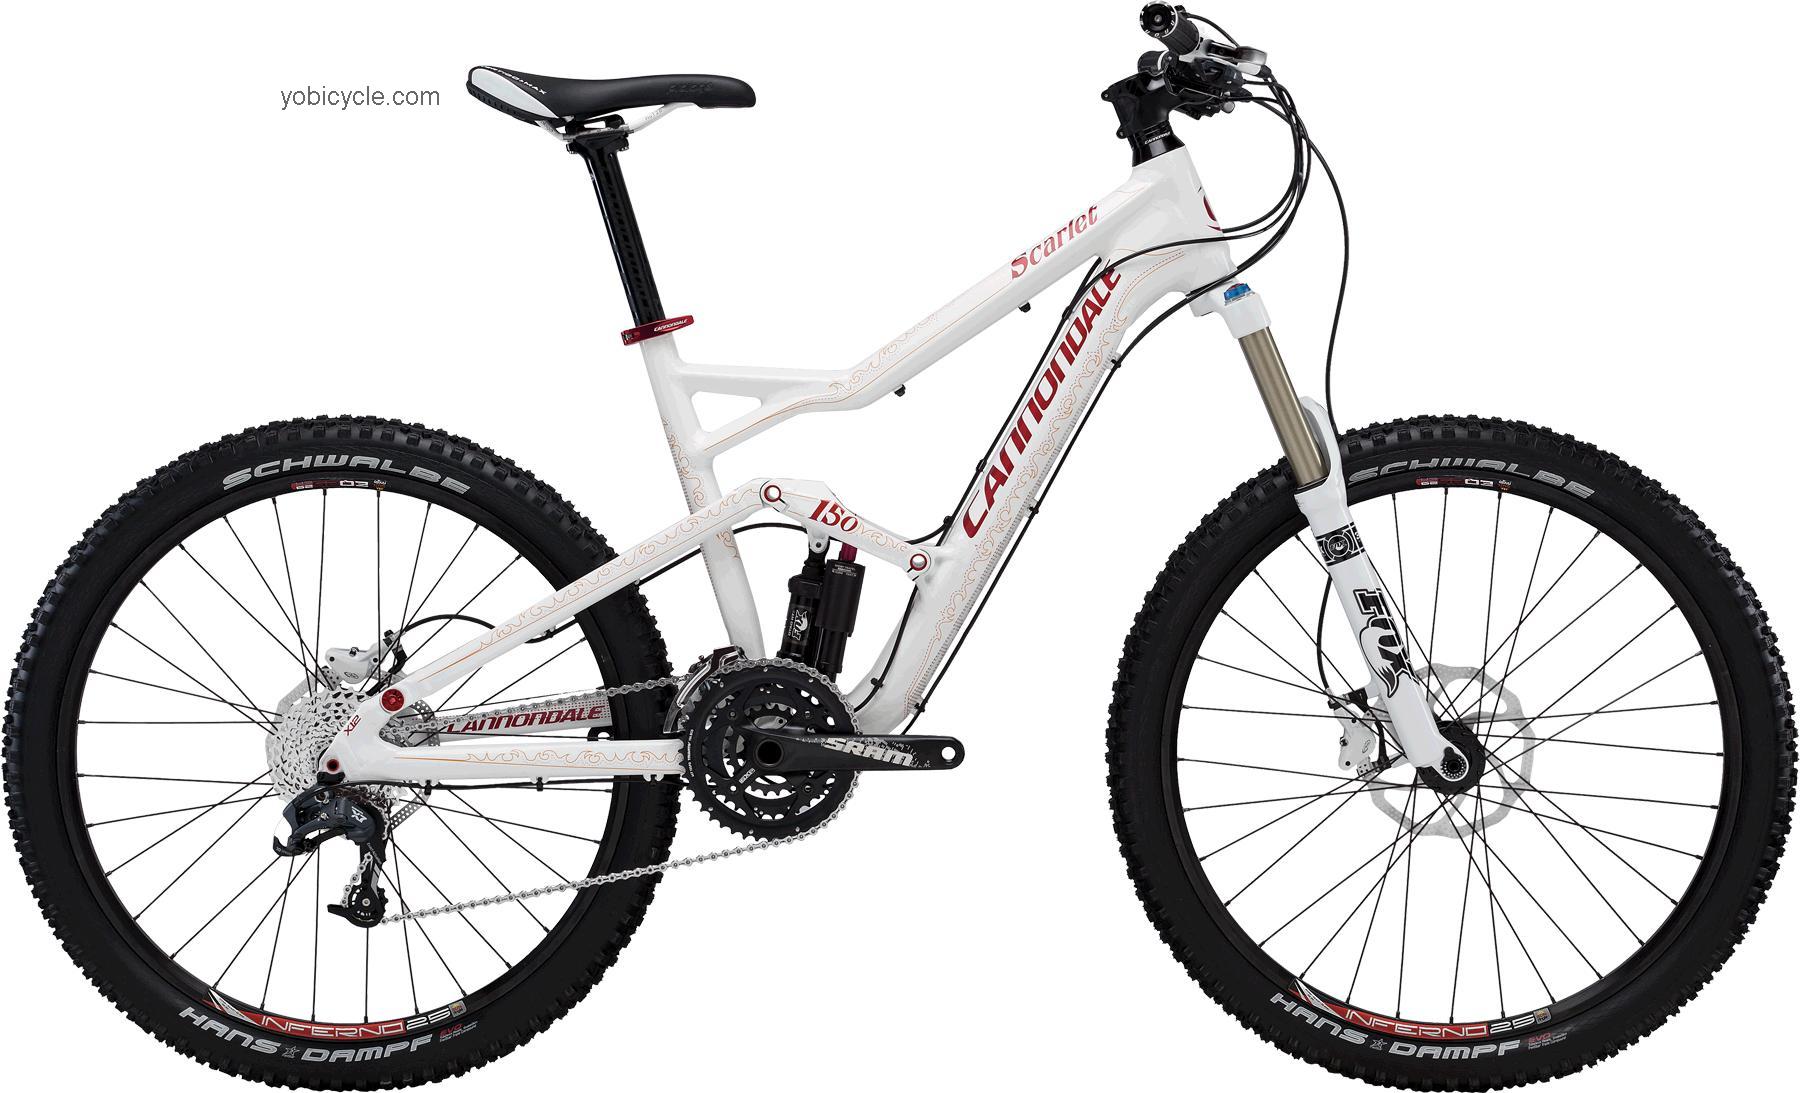 Cannondale Scarlet 2 2012 comparison online with competitors